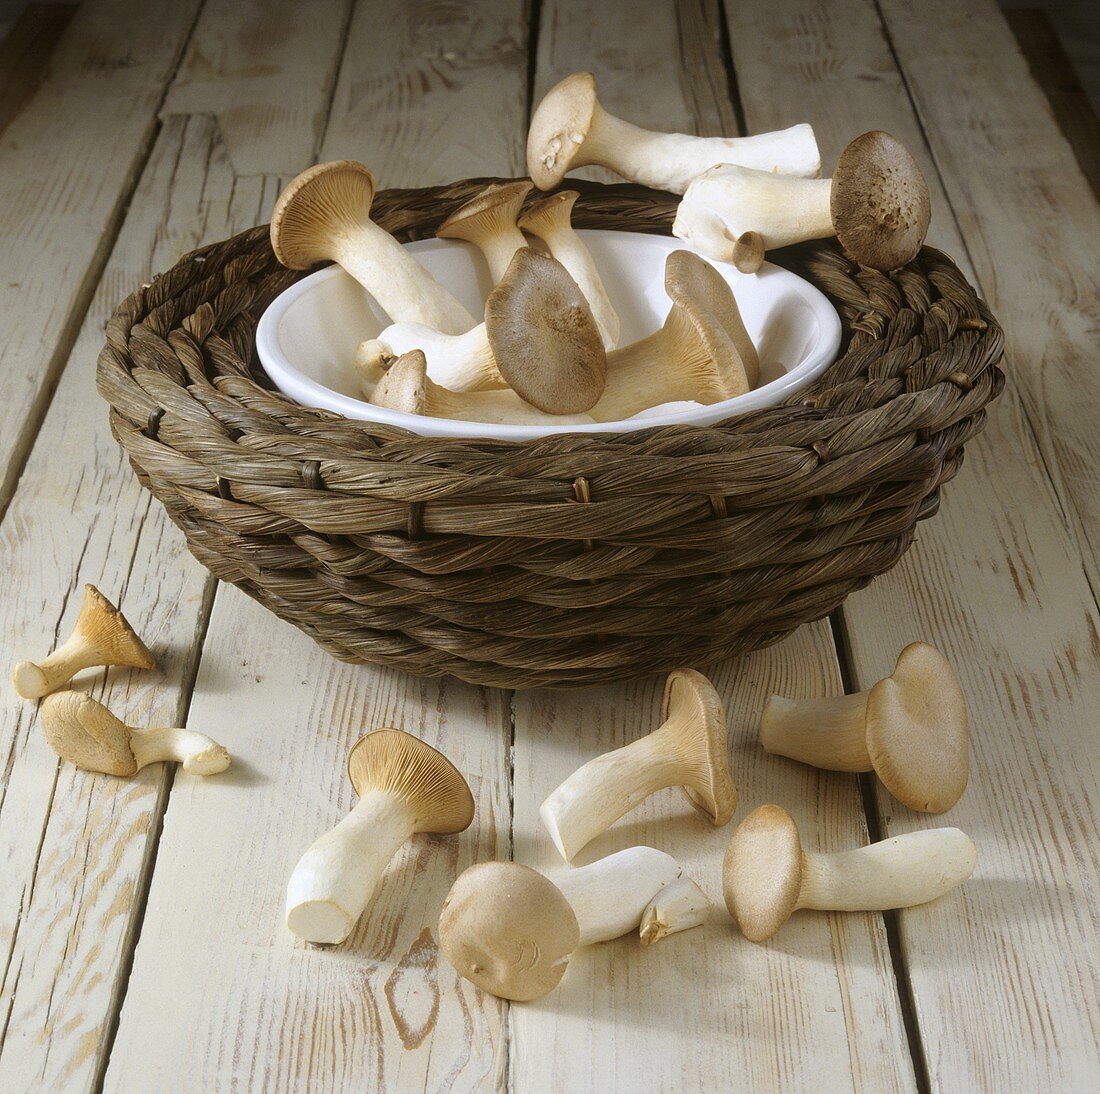 King oyster mushrooms in and in front of woven basket